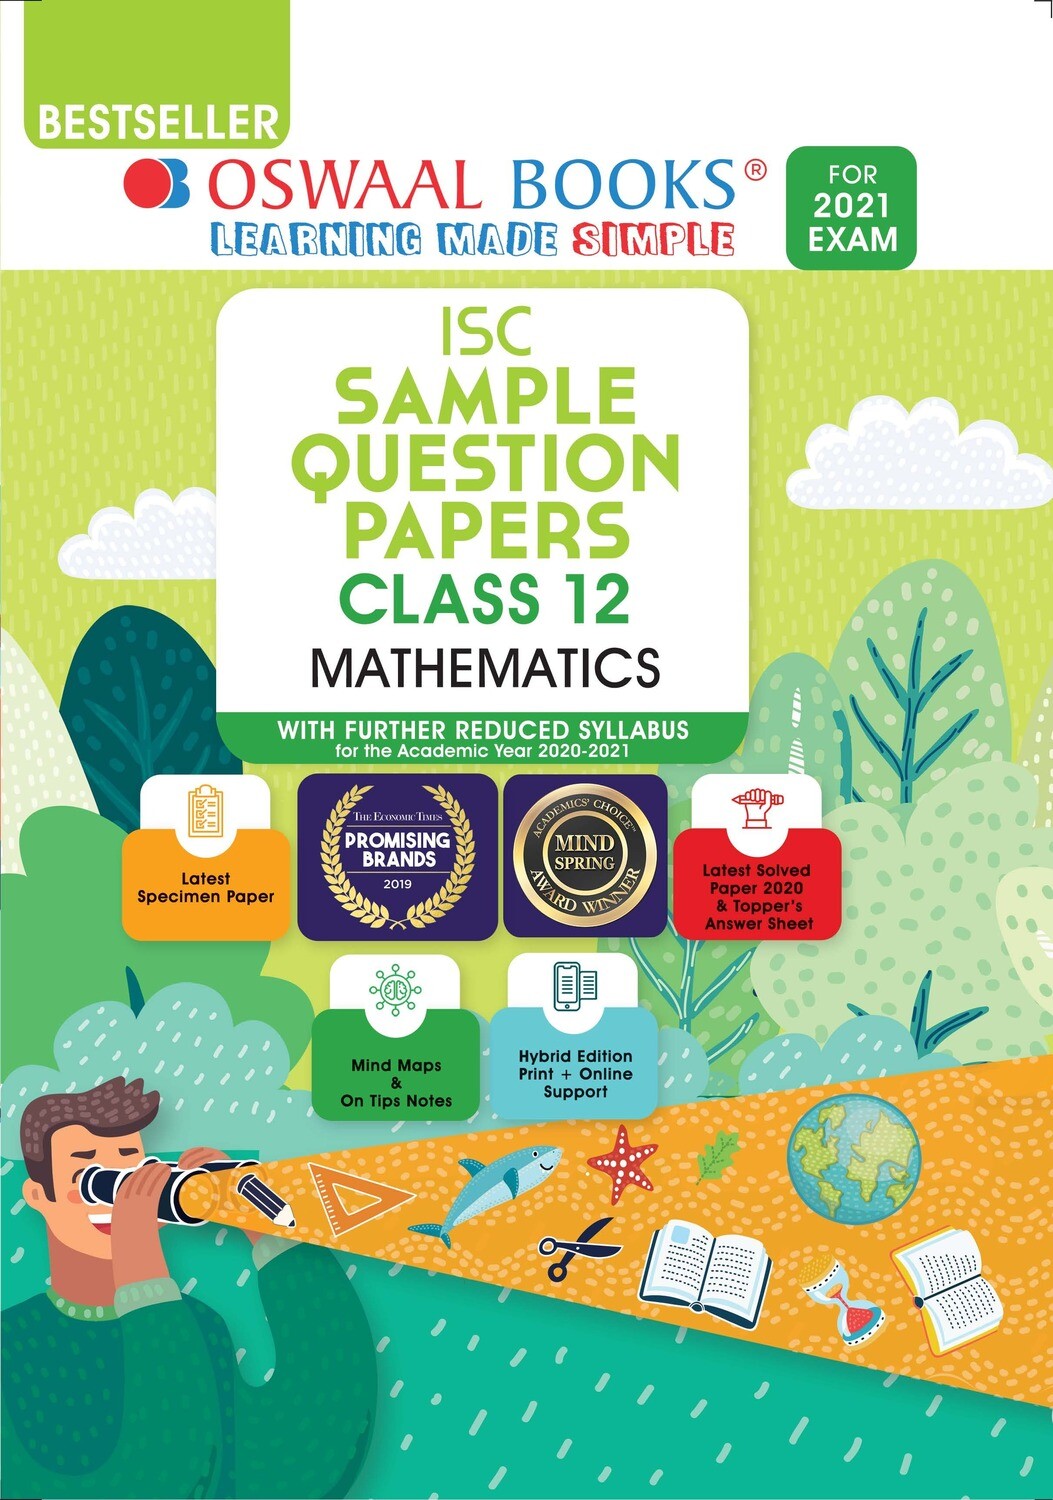 Buy e-book: Oswaal ISC Sample Question Papers Class 12 Mathematics (For 2021 Exam)